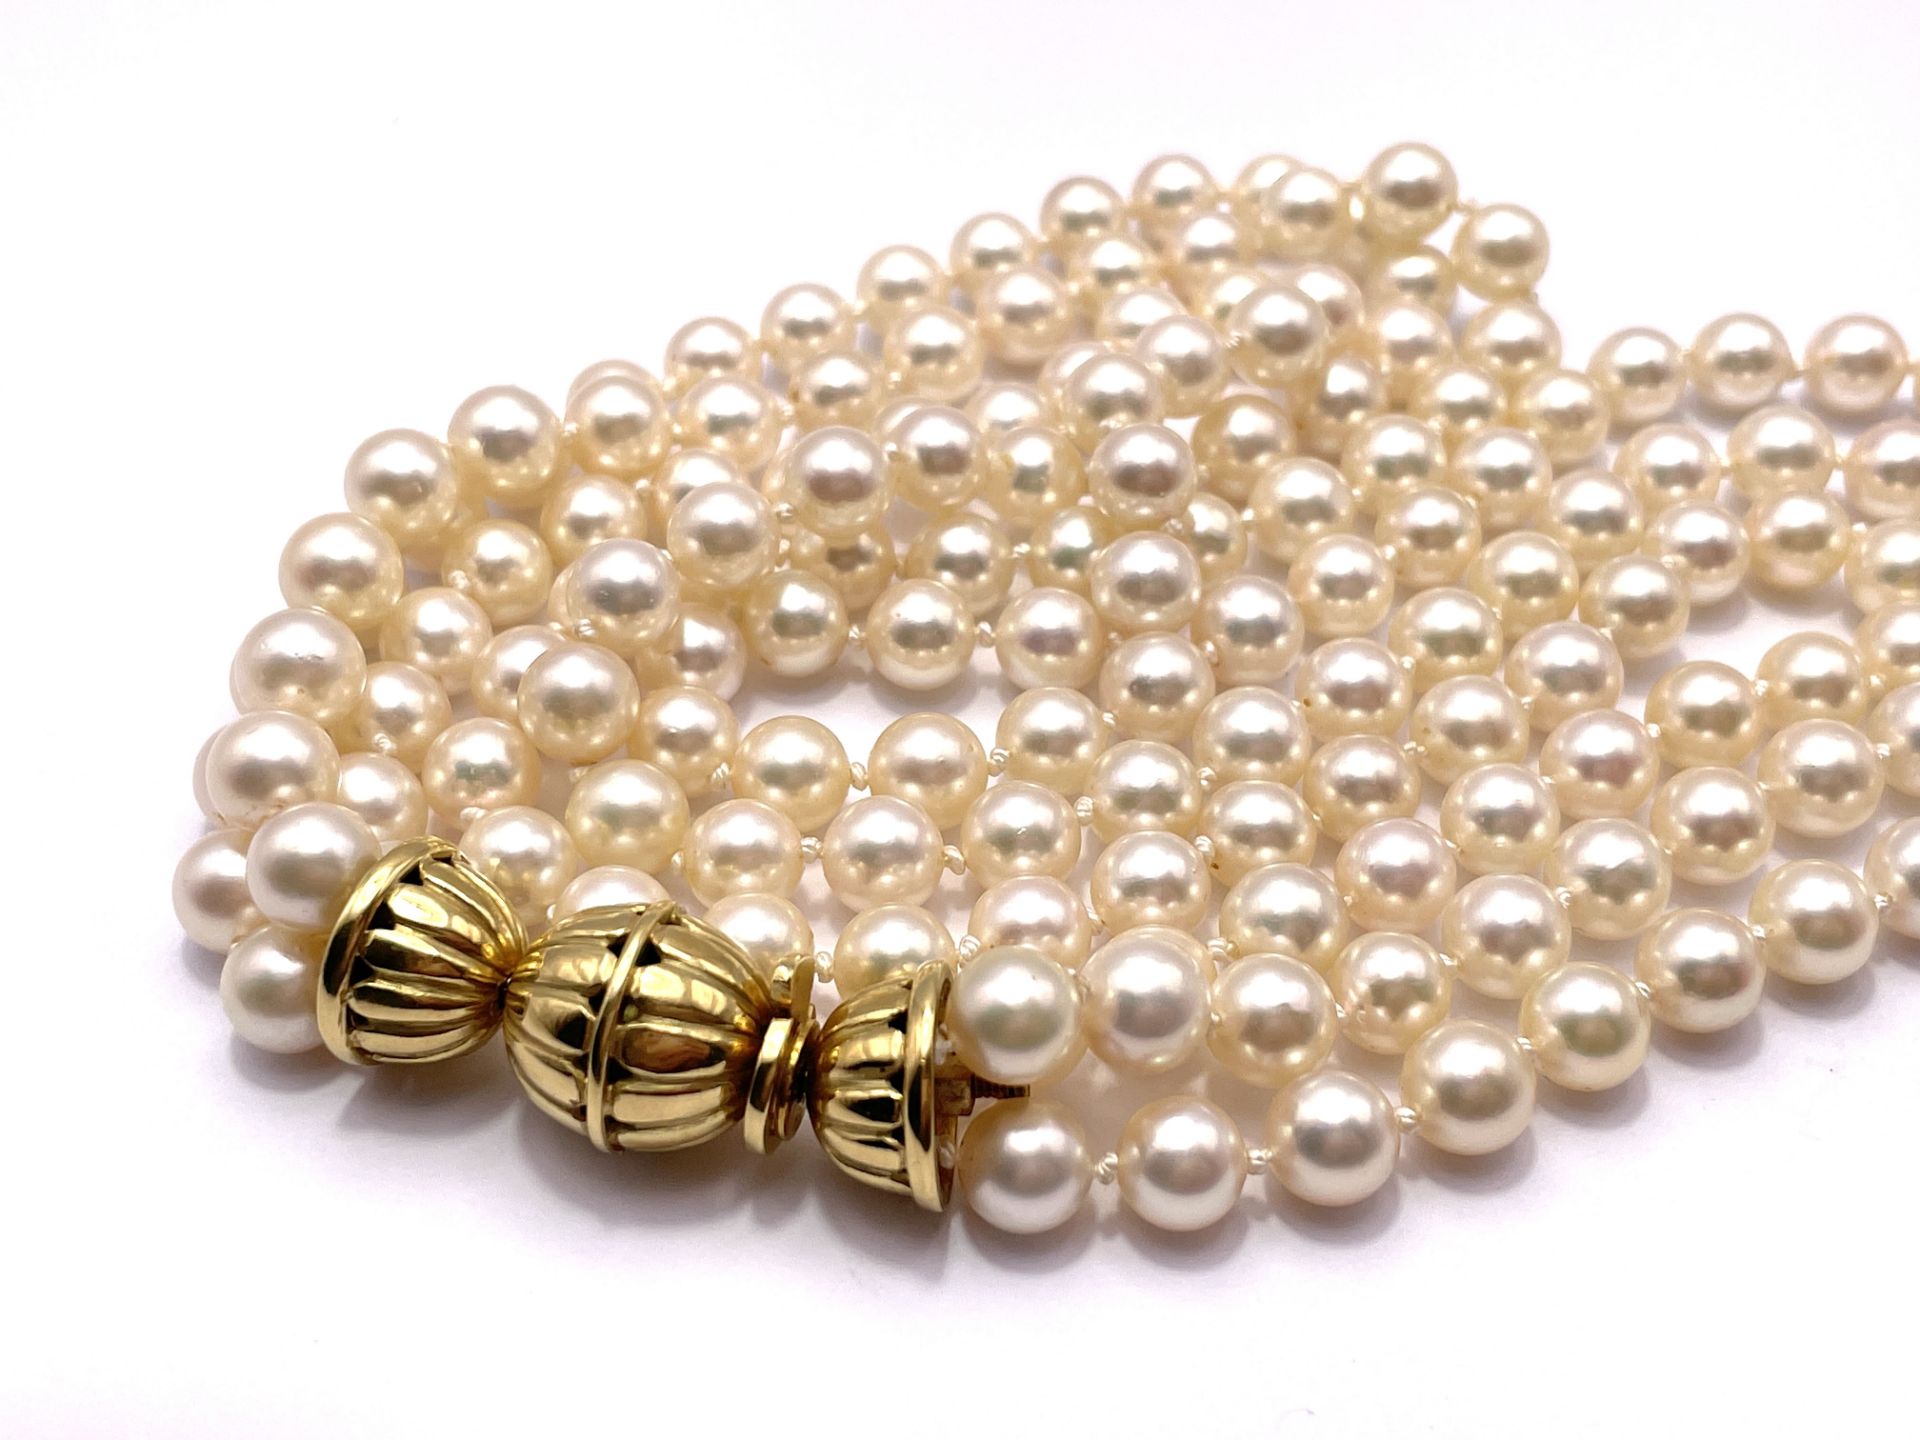 Akoya pearl necklace - Image 4 of 9